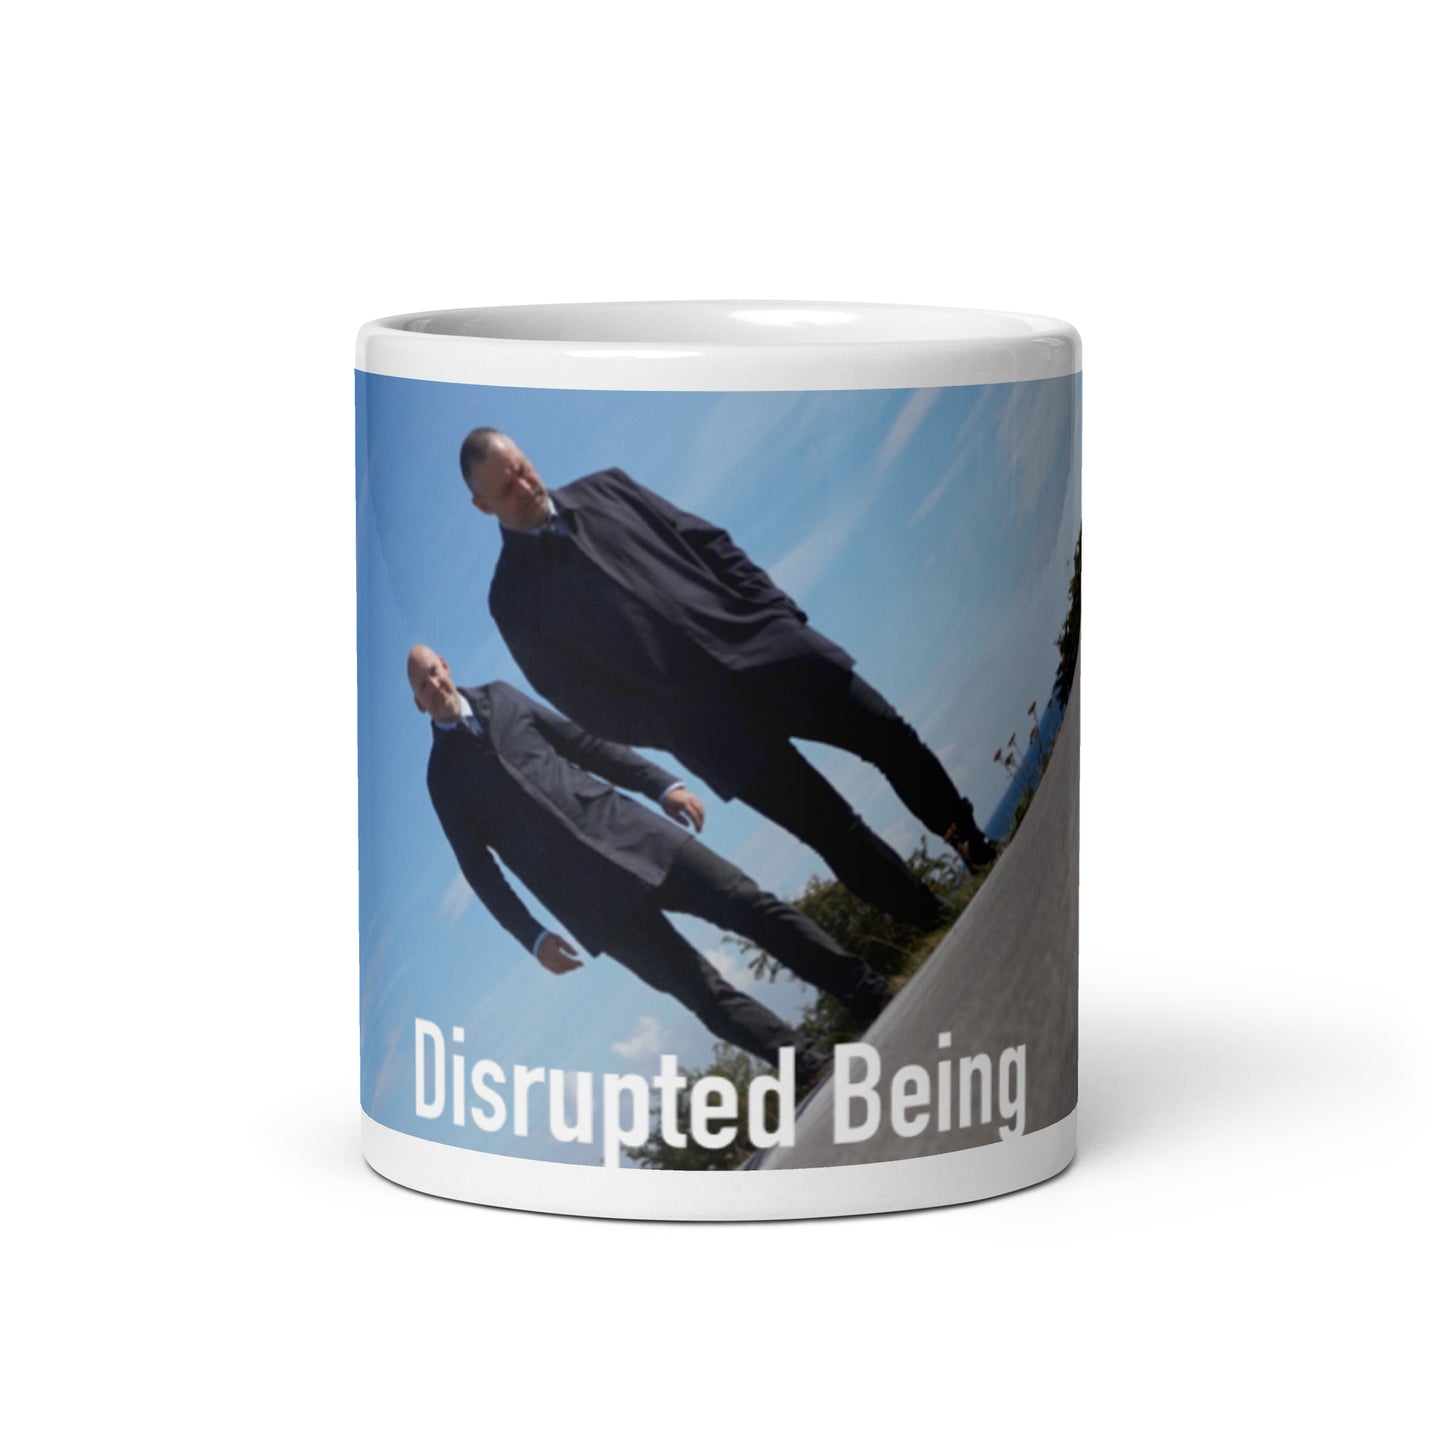 Disrupted Being, official photo and logo, White glossy mug